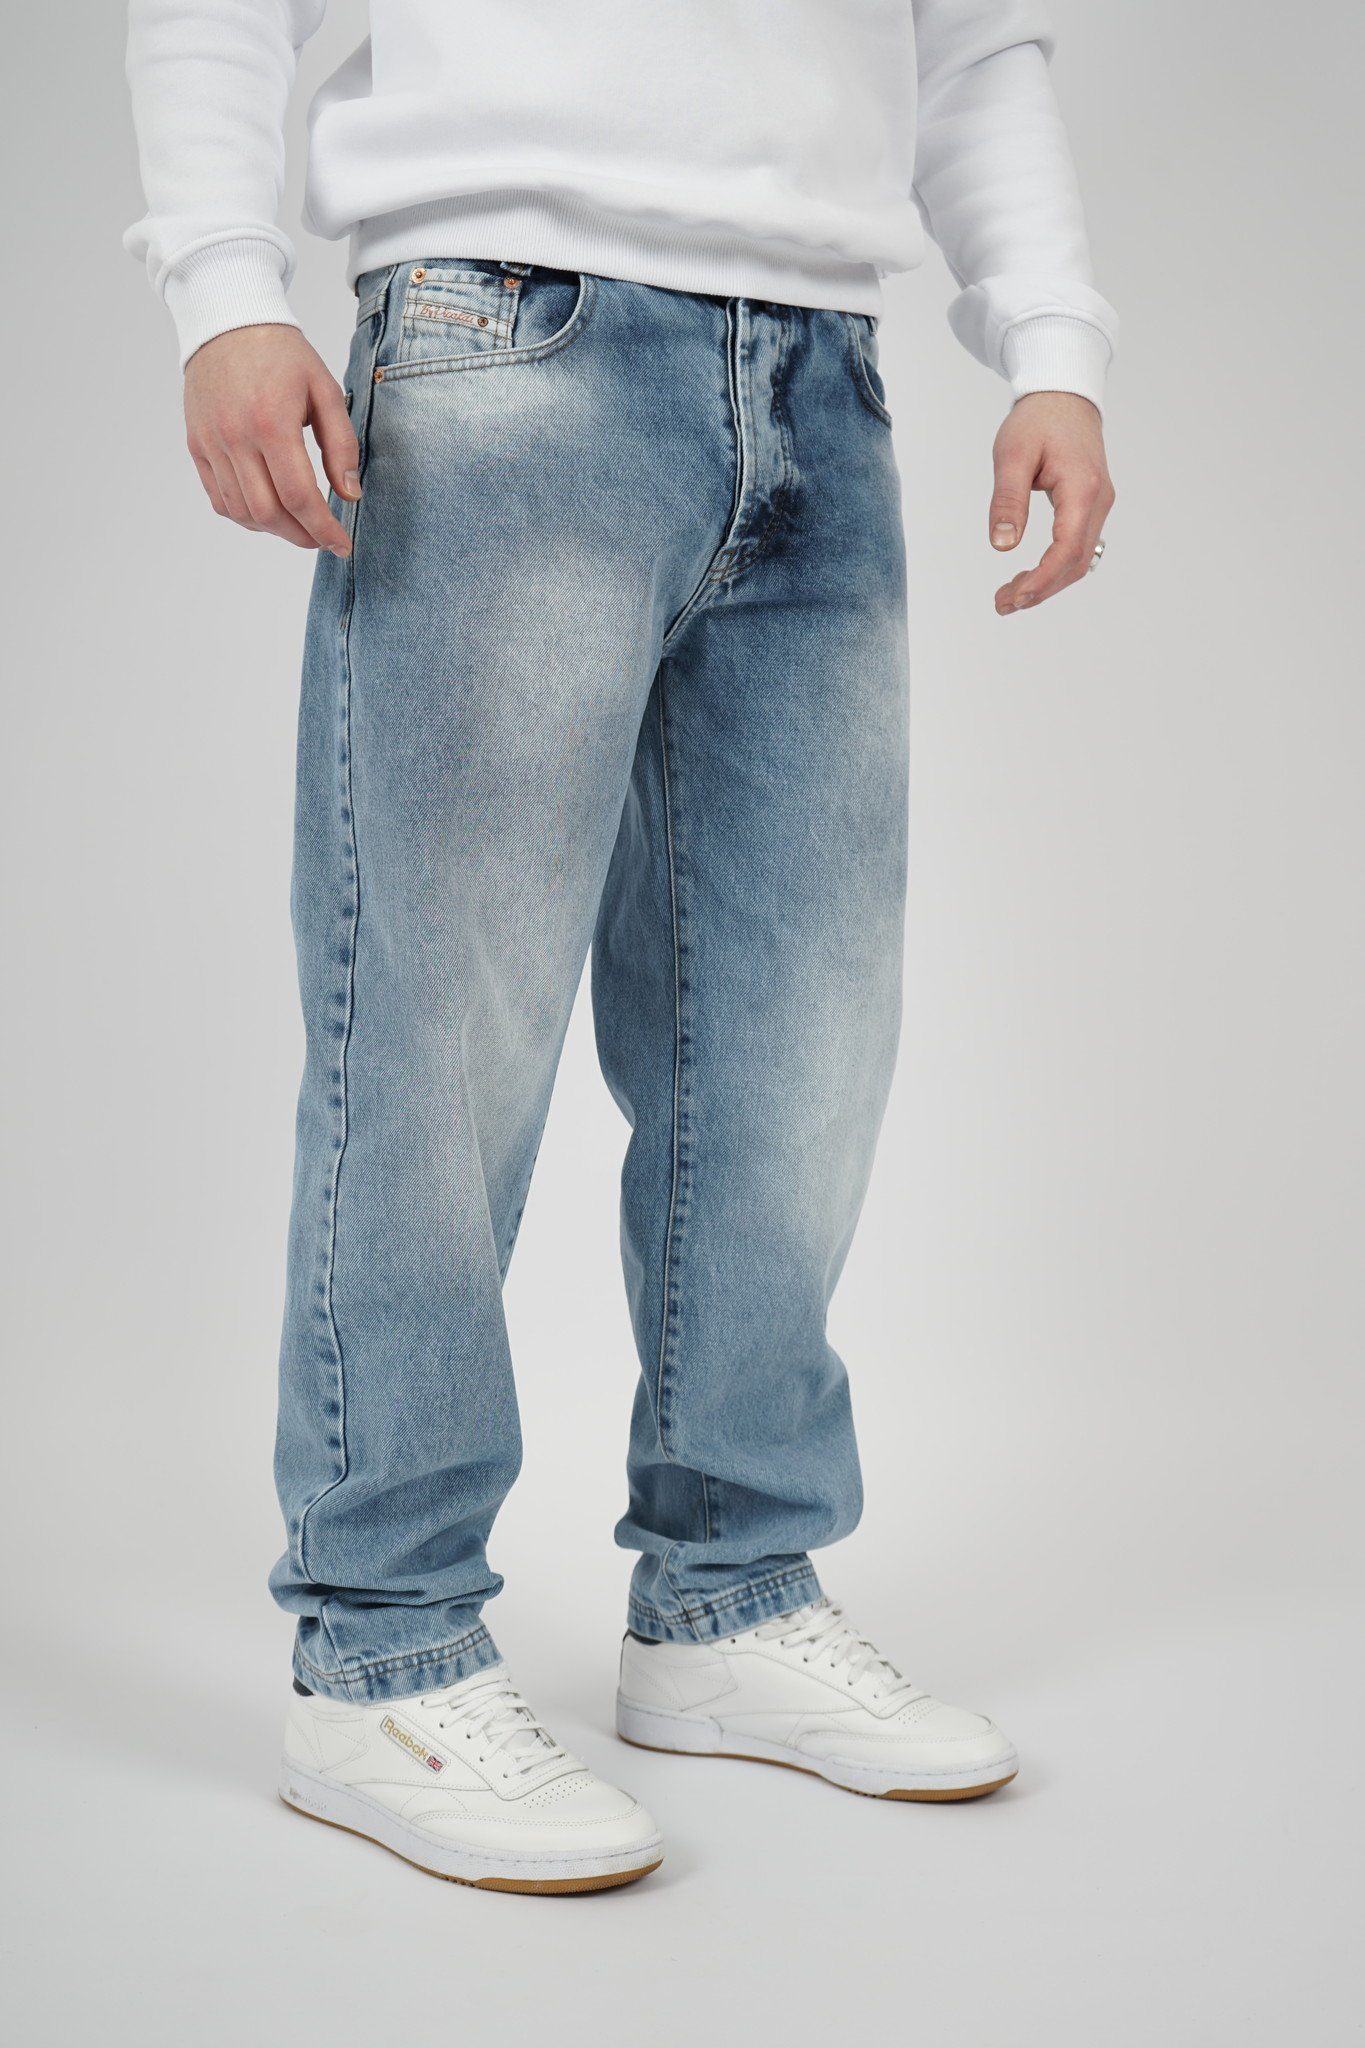 PICALDI Fit, Weite Cali Fit Loose Jeans Relaxed 472 Zicco Jeans